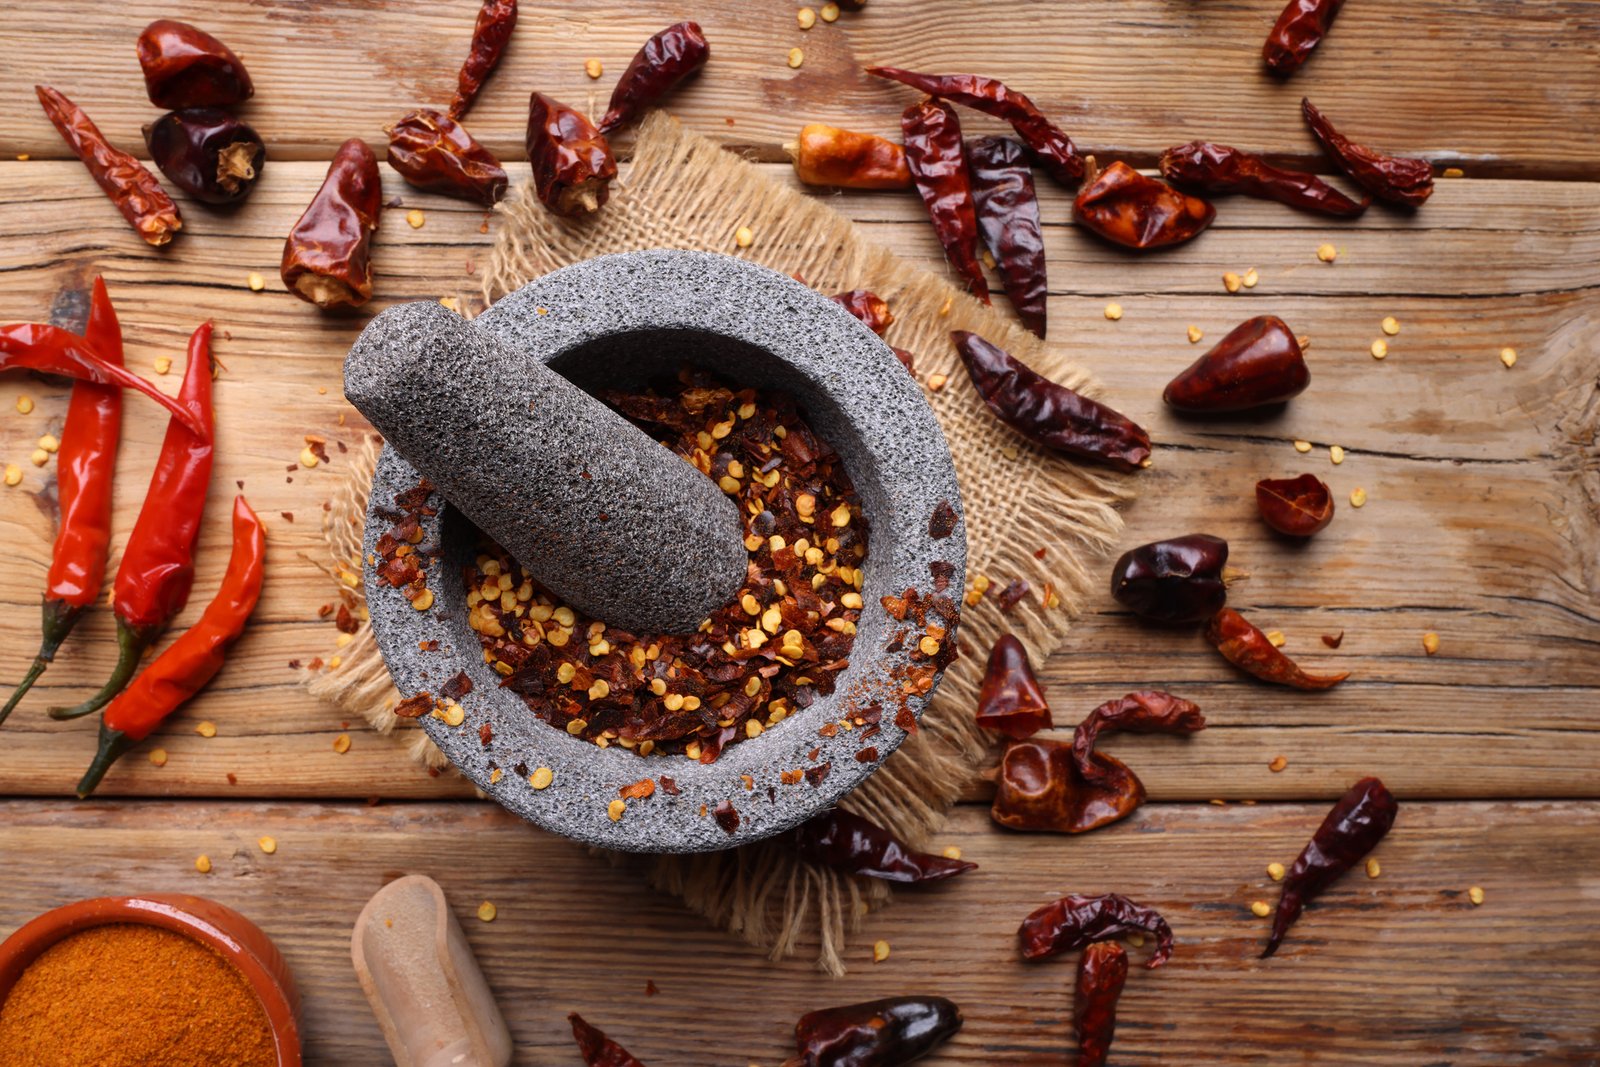 Seasoning Your Pestle and Mortar: A Step-by-Step Guide